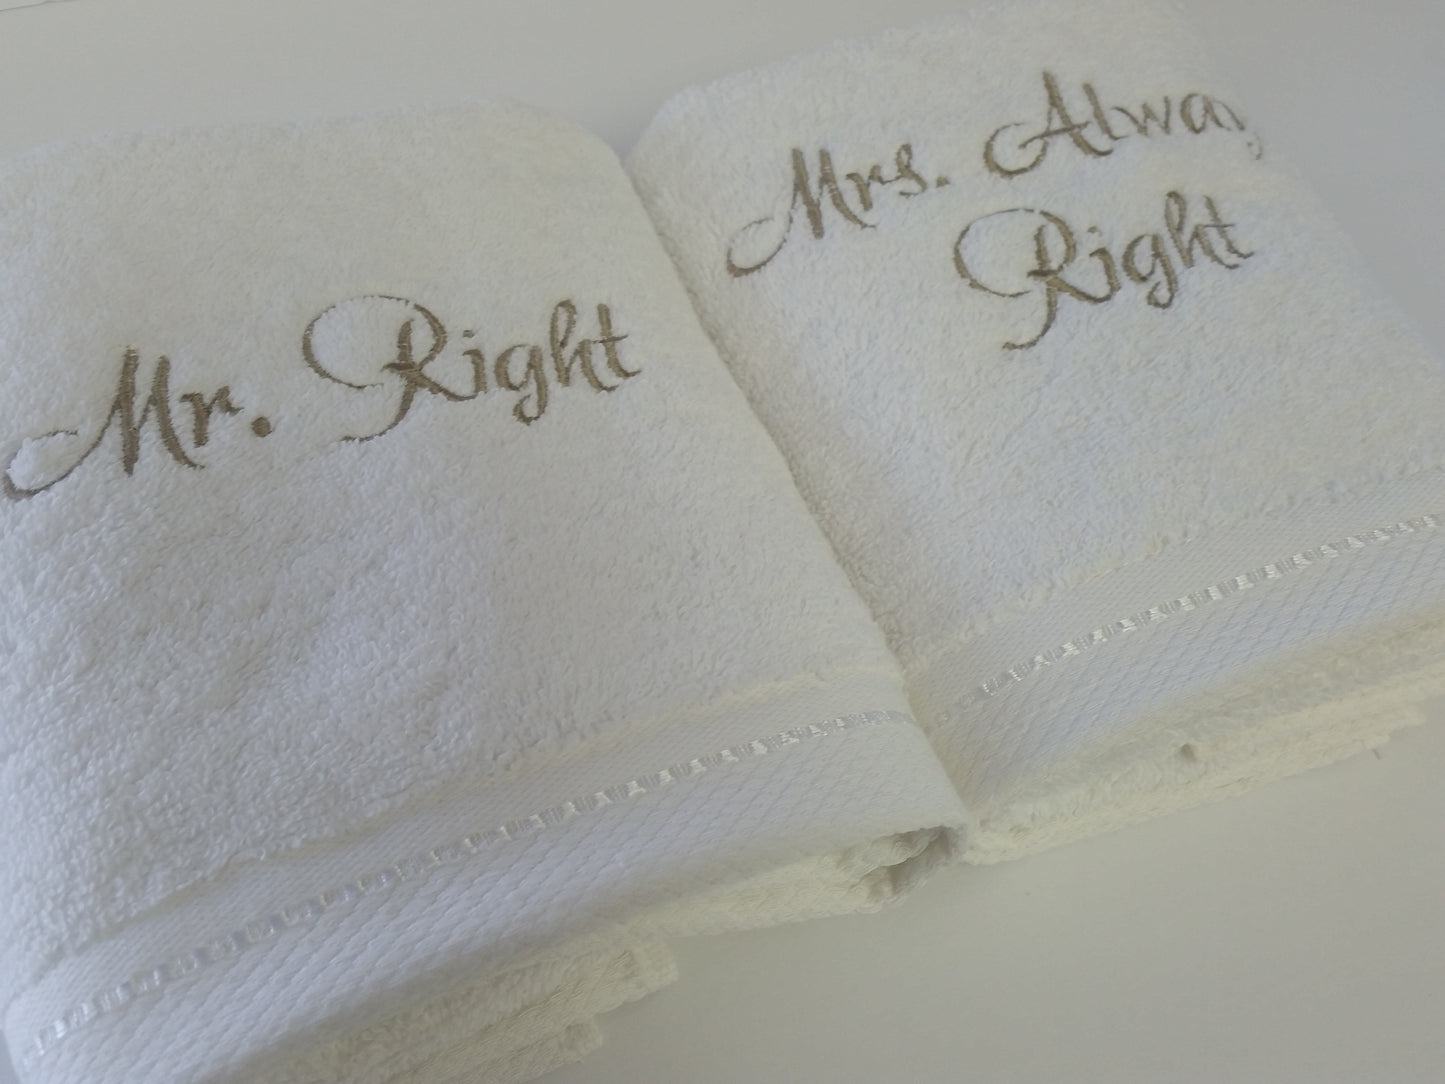 Mr. Right/ Mrs. Always Right Hand Towel Set